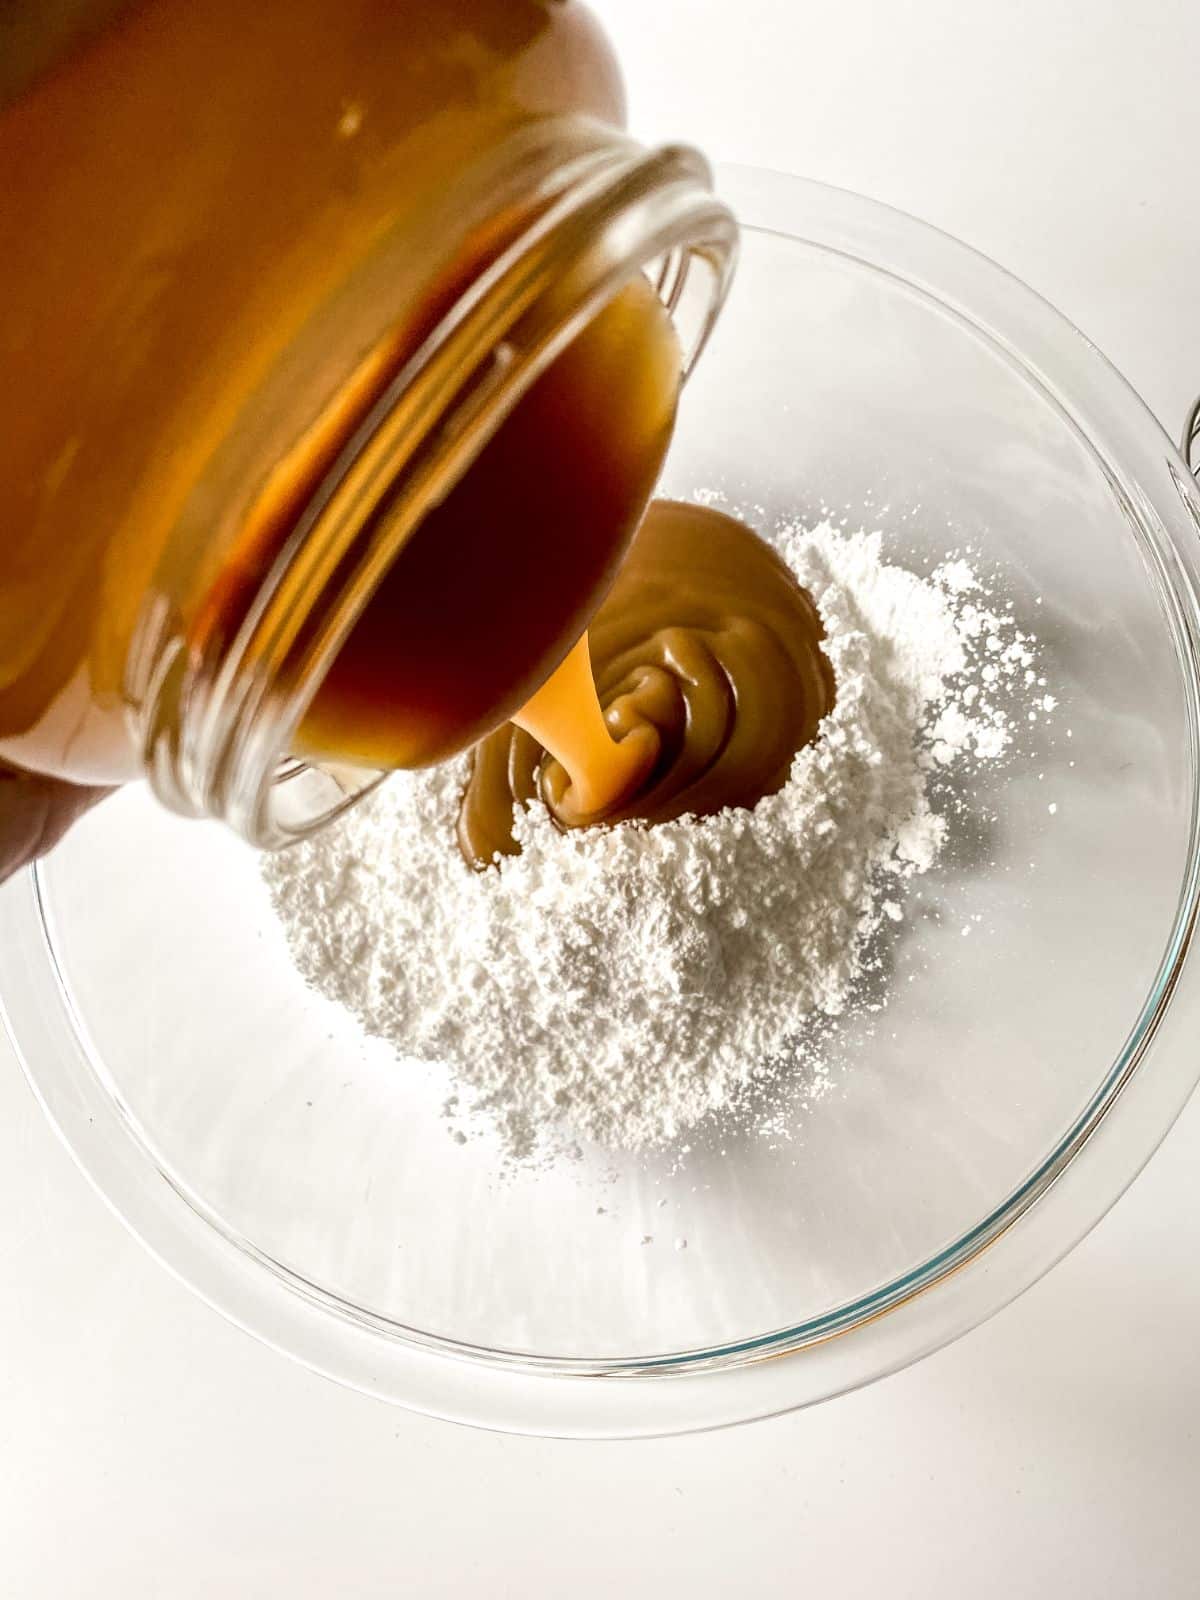 caramel sauce being poured into powdered sugar